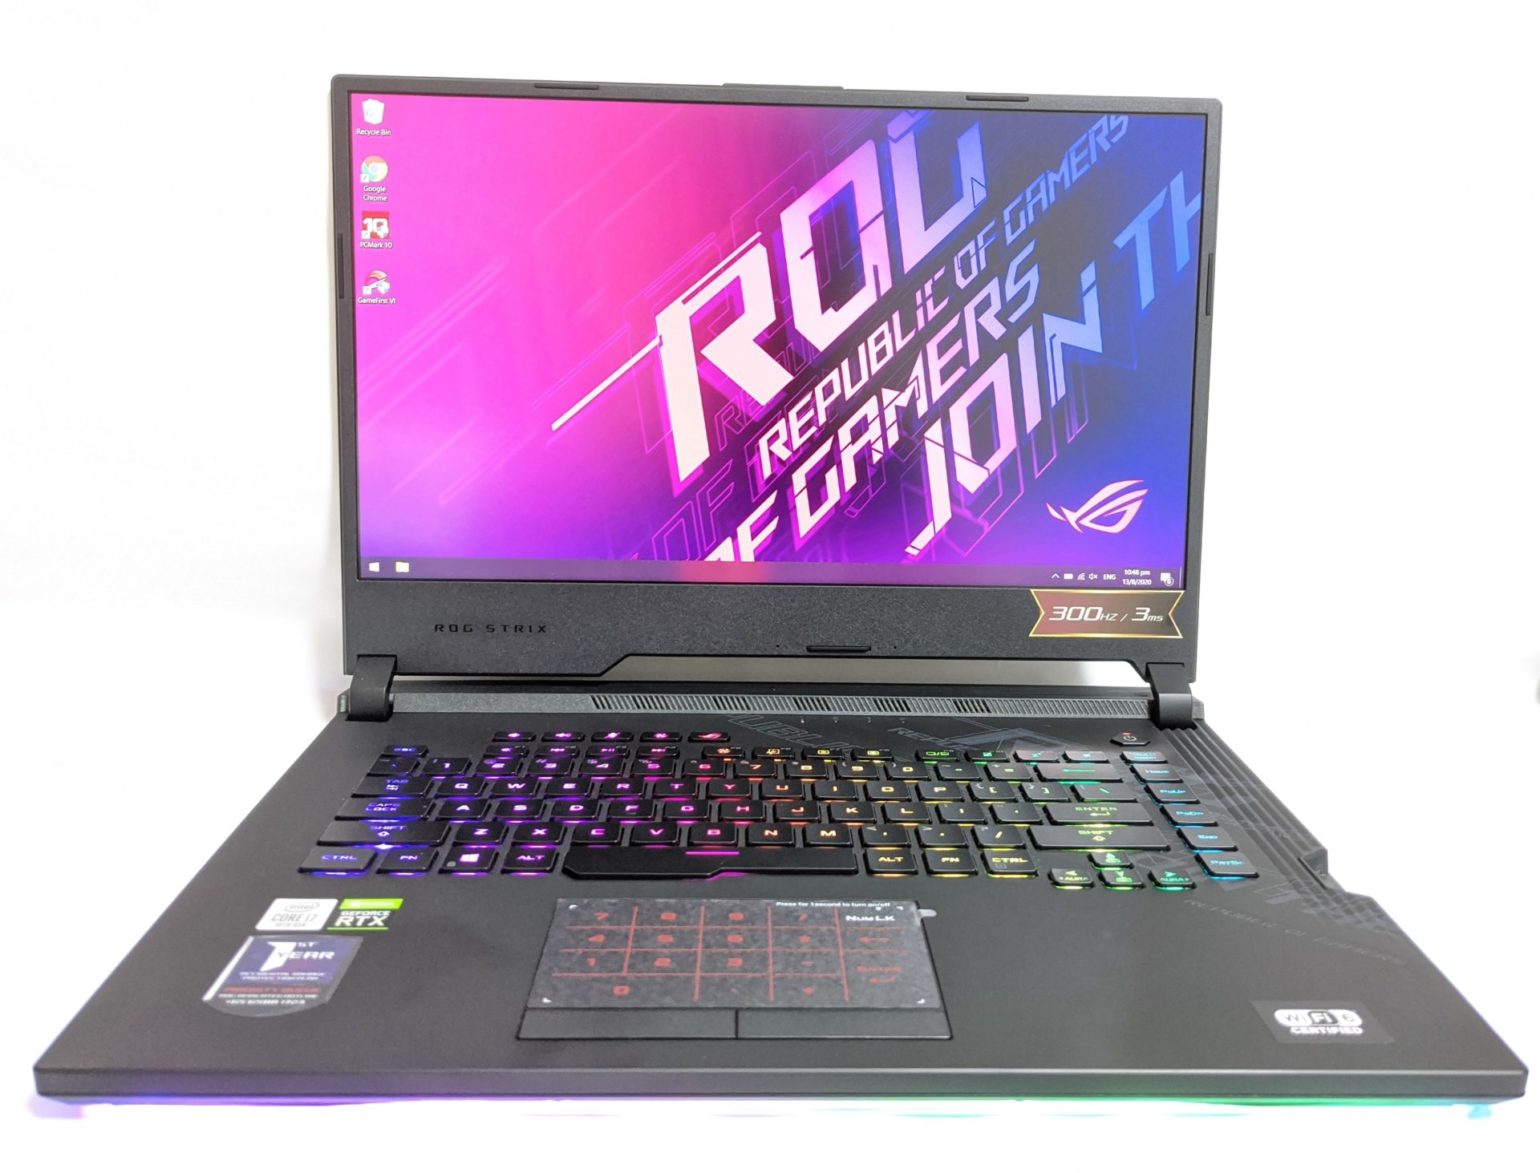 Asus Rog Strix Scar 15 Gl532 Review Full On Performance With No